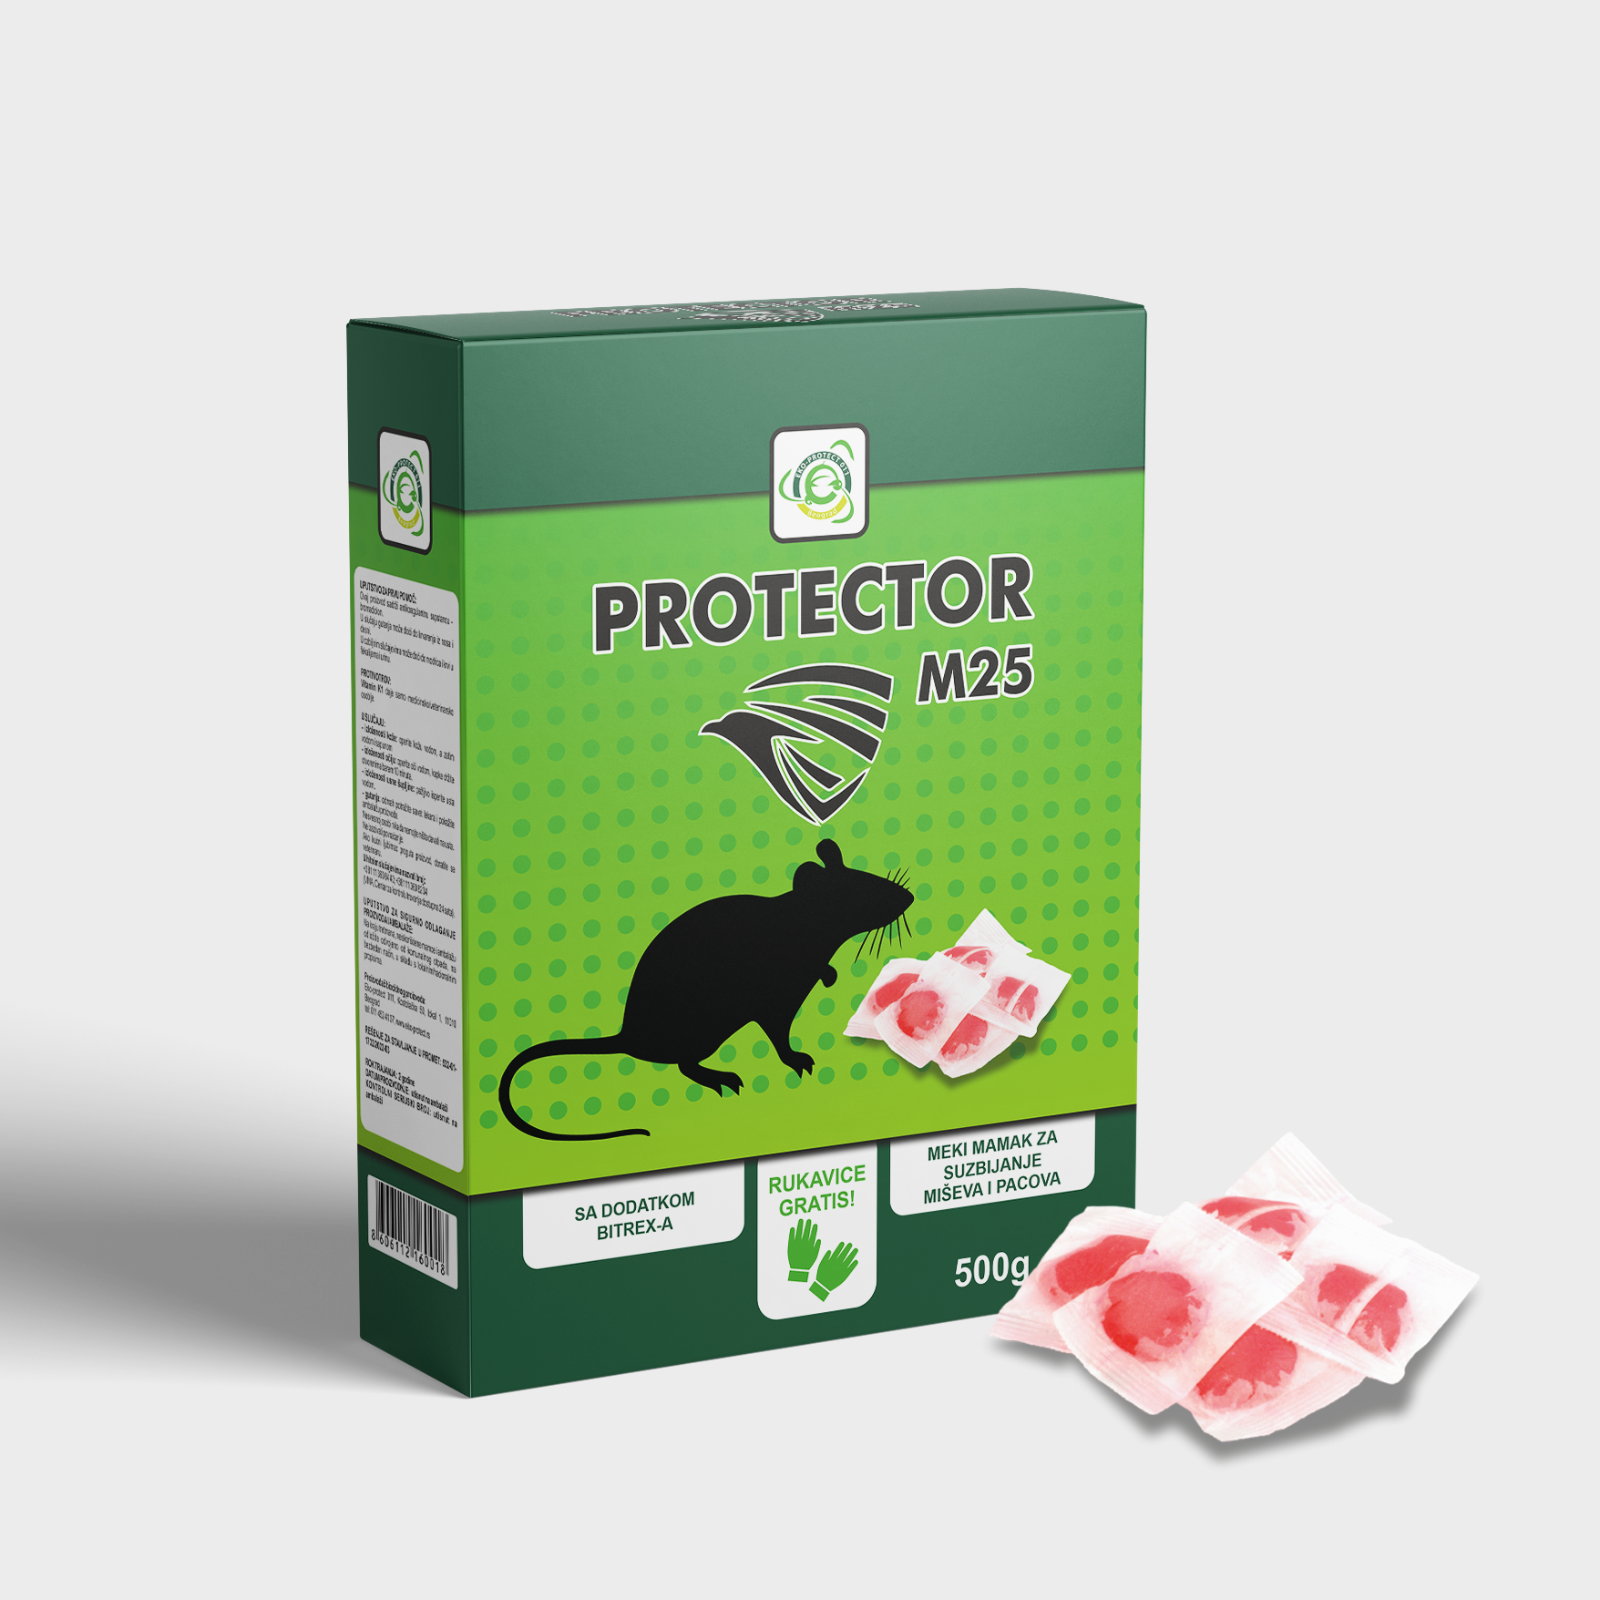 PROTECTOR - M25, 0.500 gr.